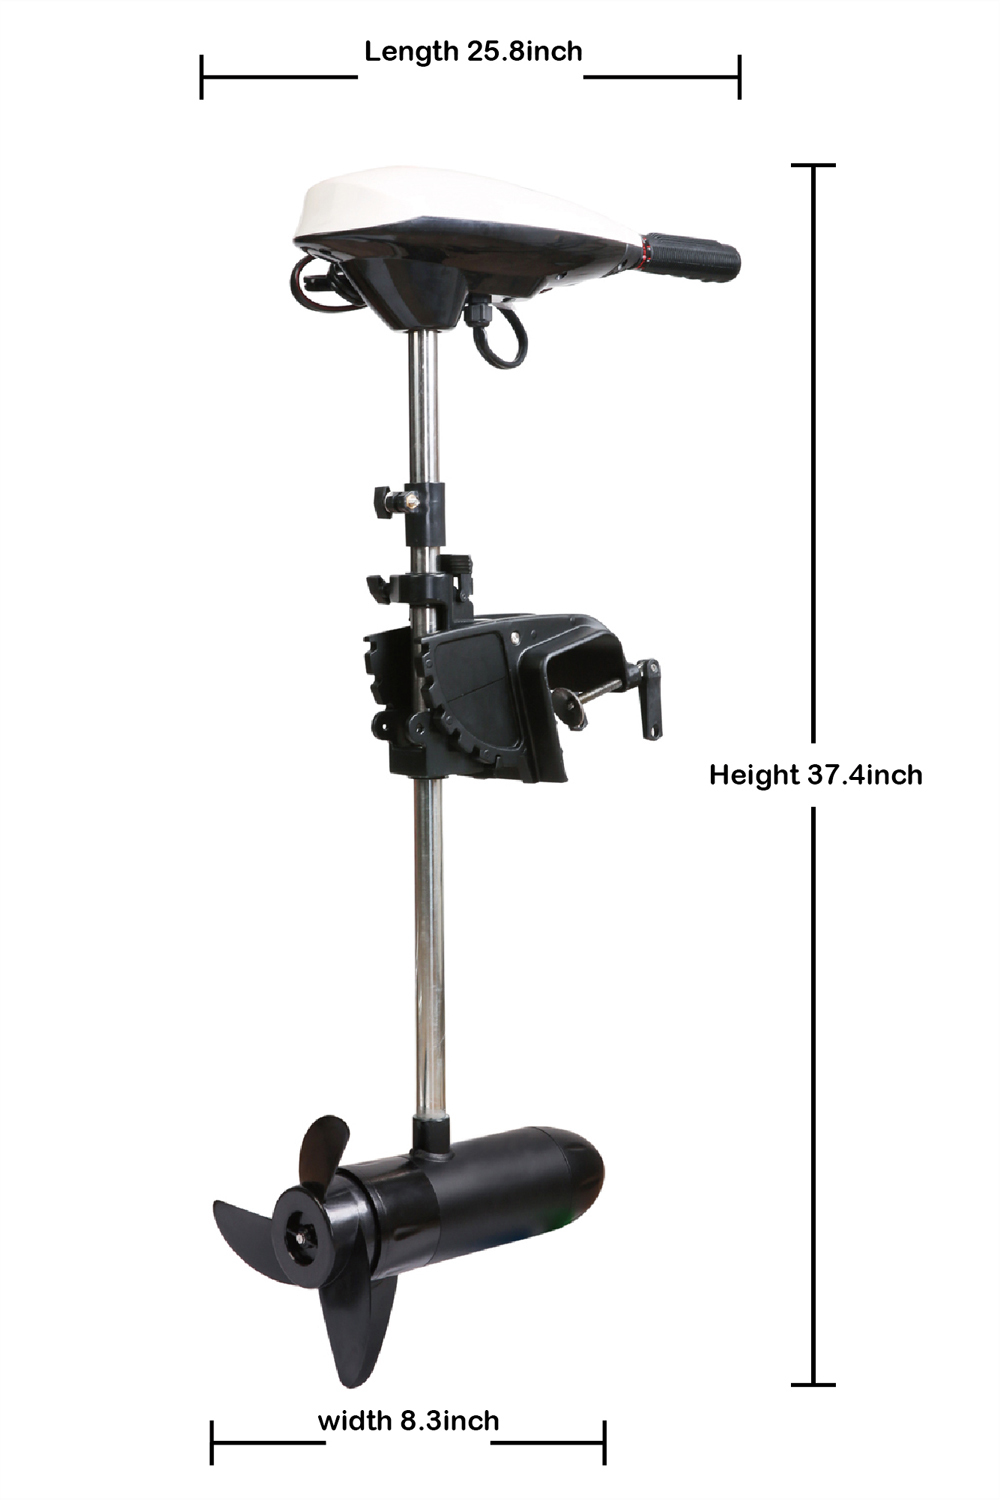 Fox Electric Outboard Motor 55lbs mit Batterieanzeige